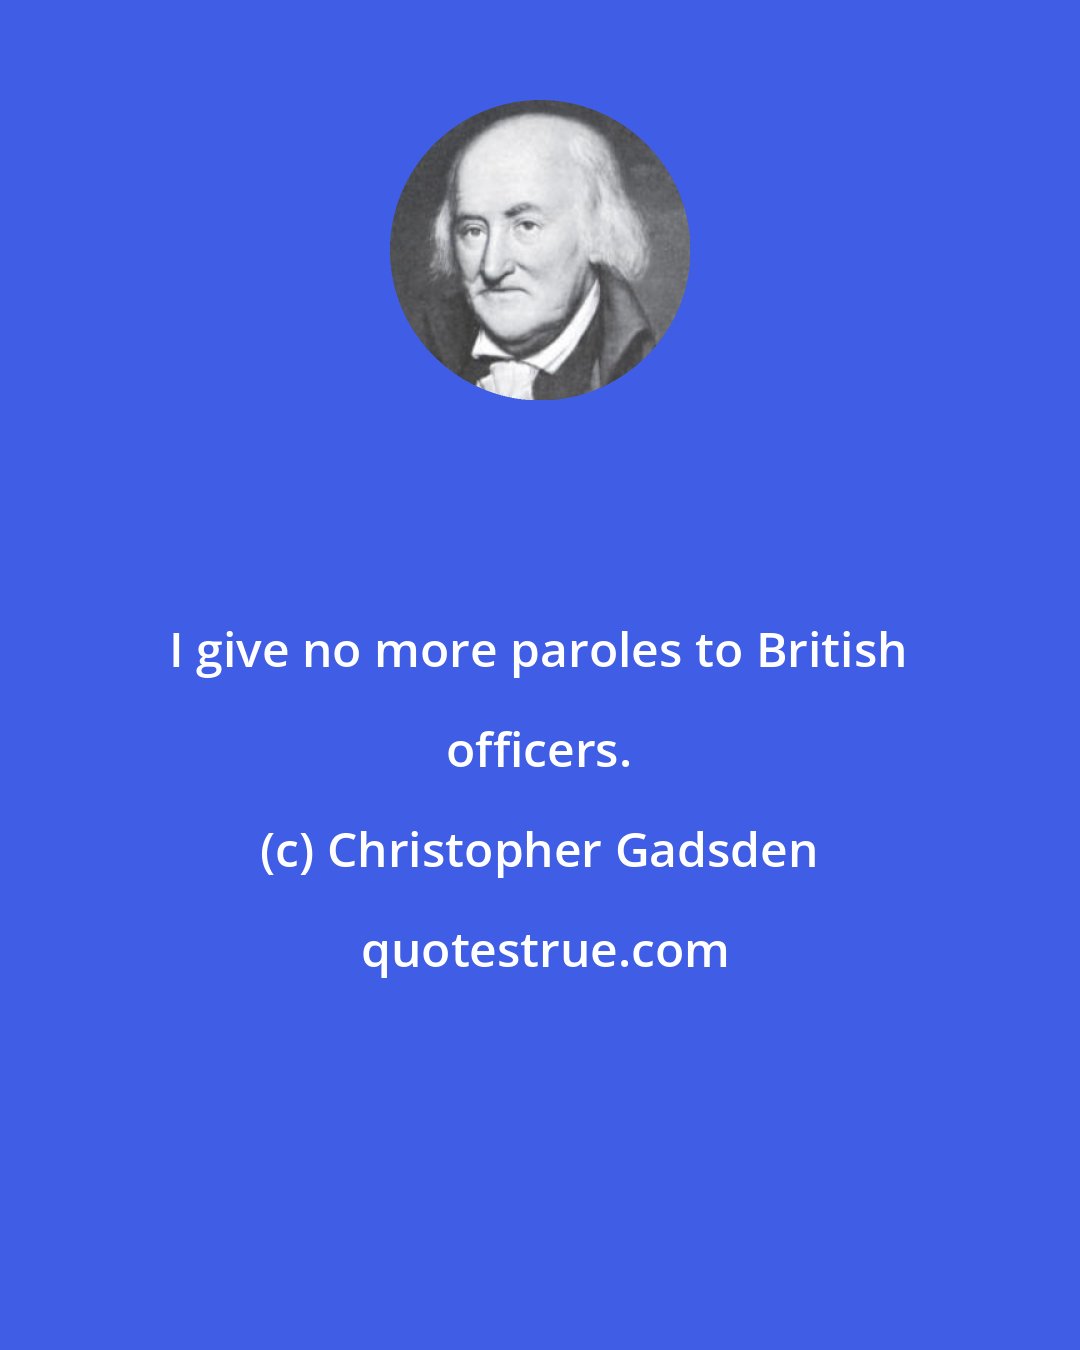 Christopher Gadsden: I give no more paroles to British officers.